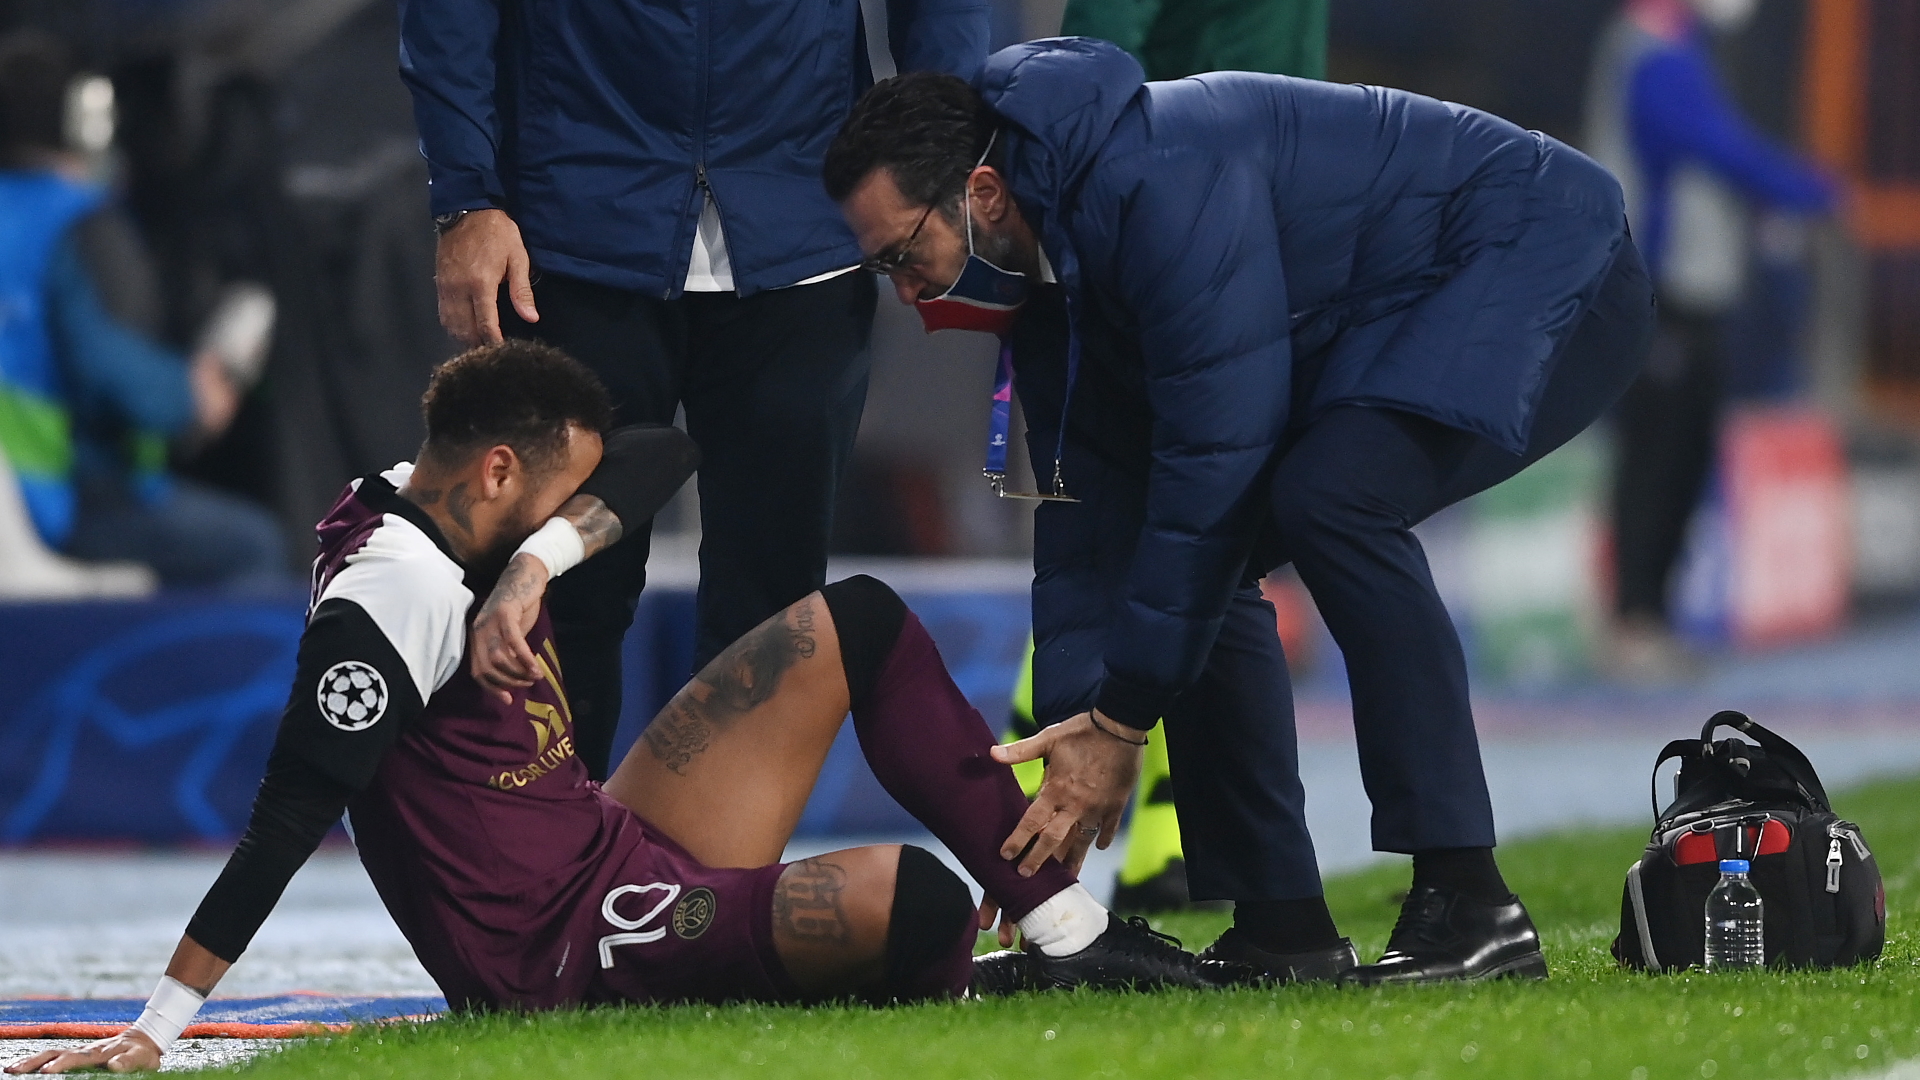 'Neymar has incredibly sensitive feet' - Brazilian star suffers 'extreme pain' when fouled, says PSG assistant Low